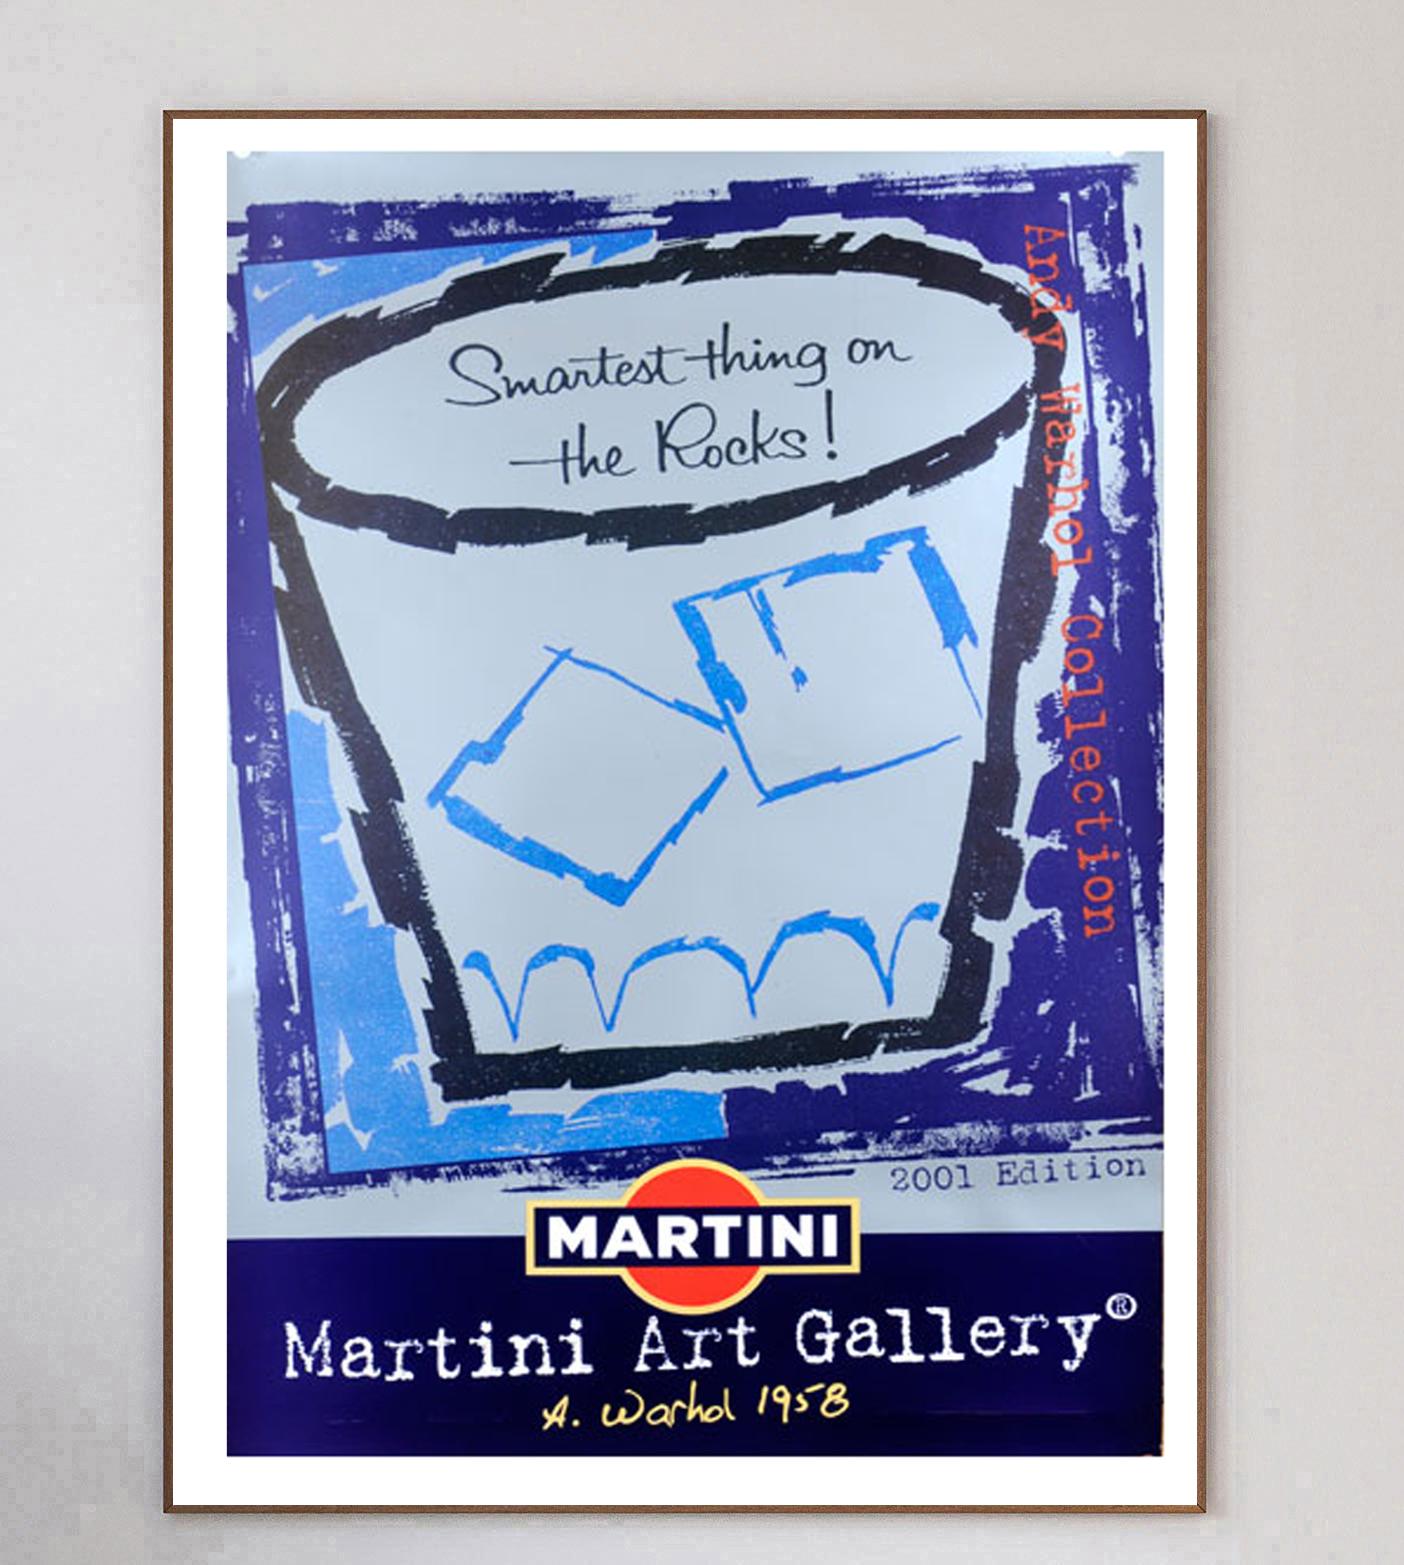 Designed by the legendary Andy Warhol in 1958, this poster for 